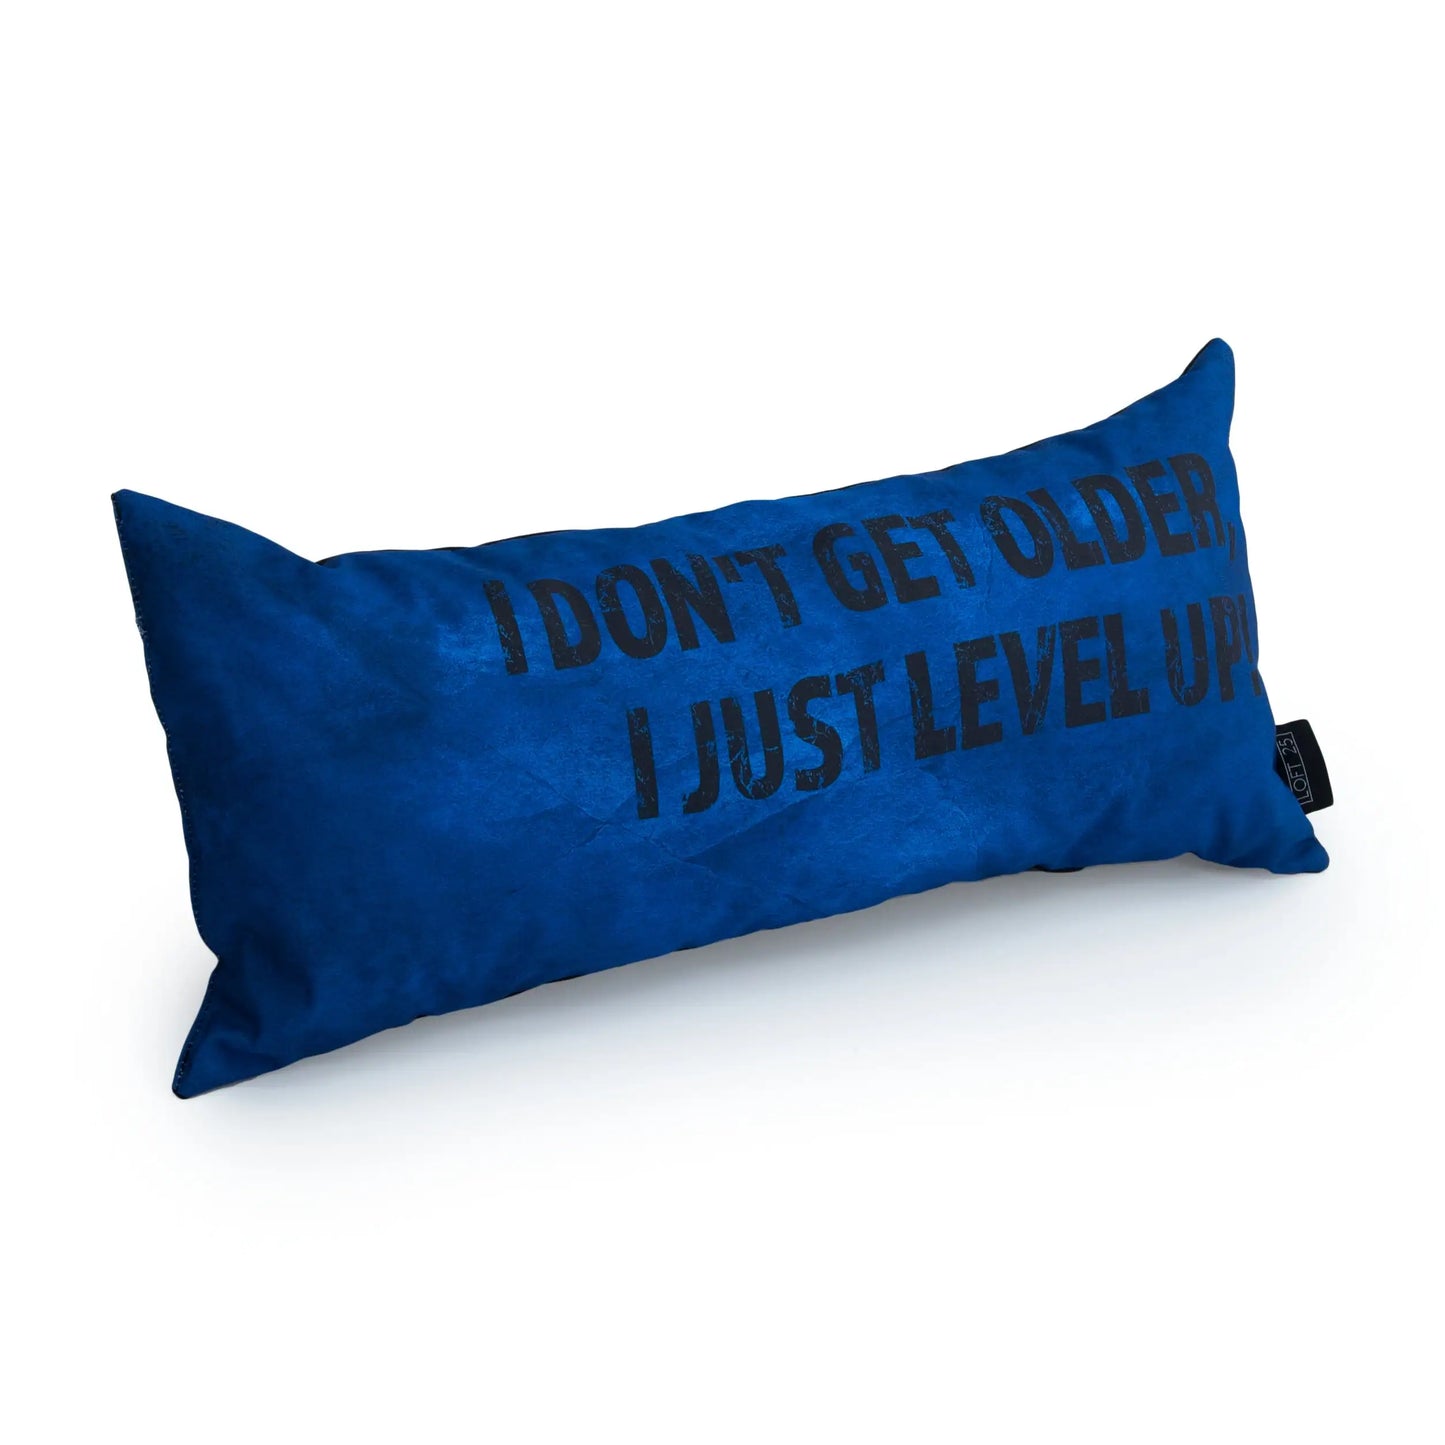 A blue pillow with the text "I don't get older, I just level up."